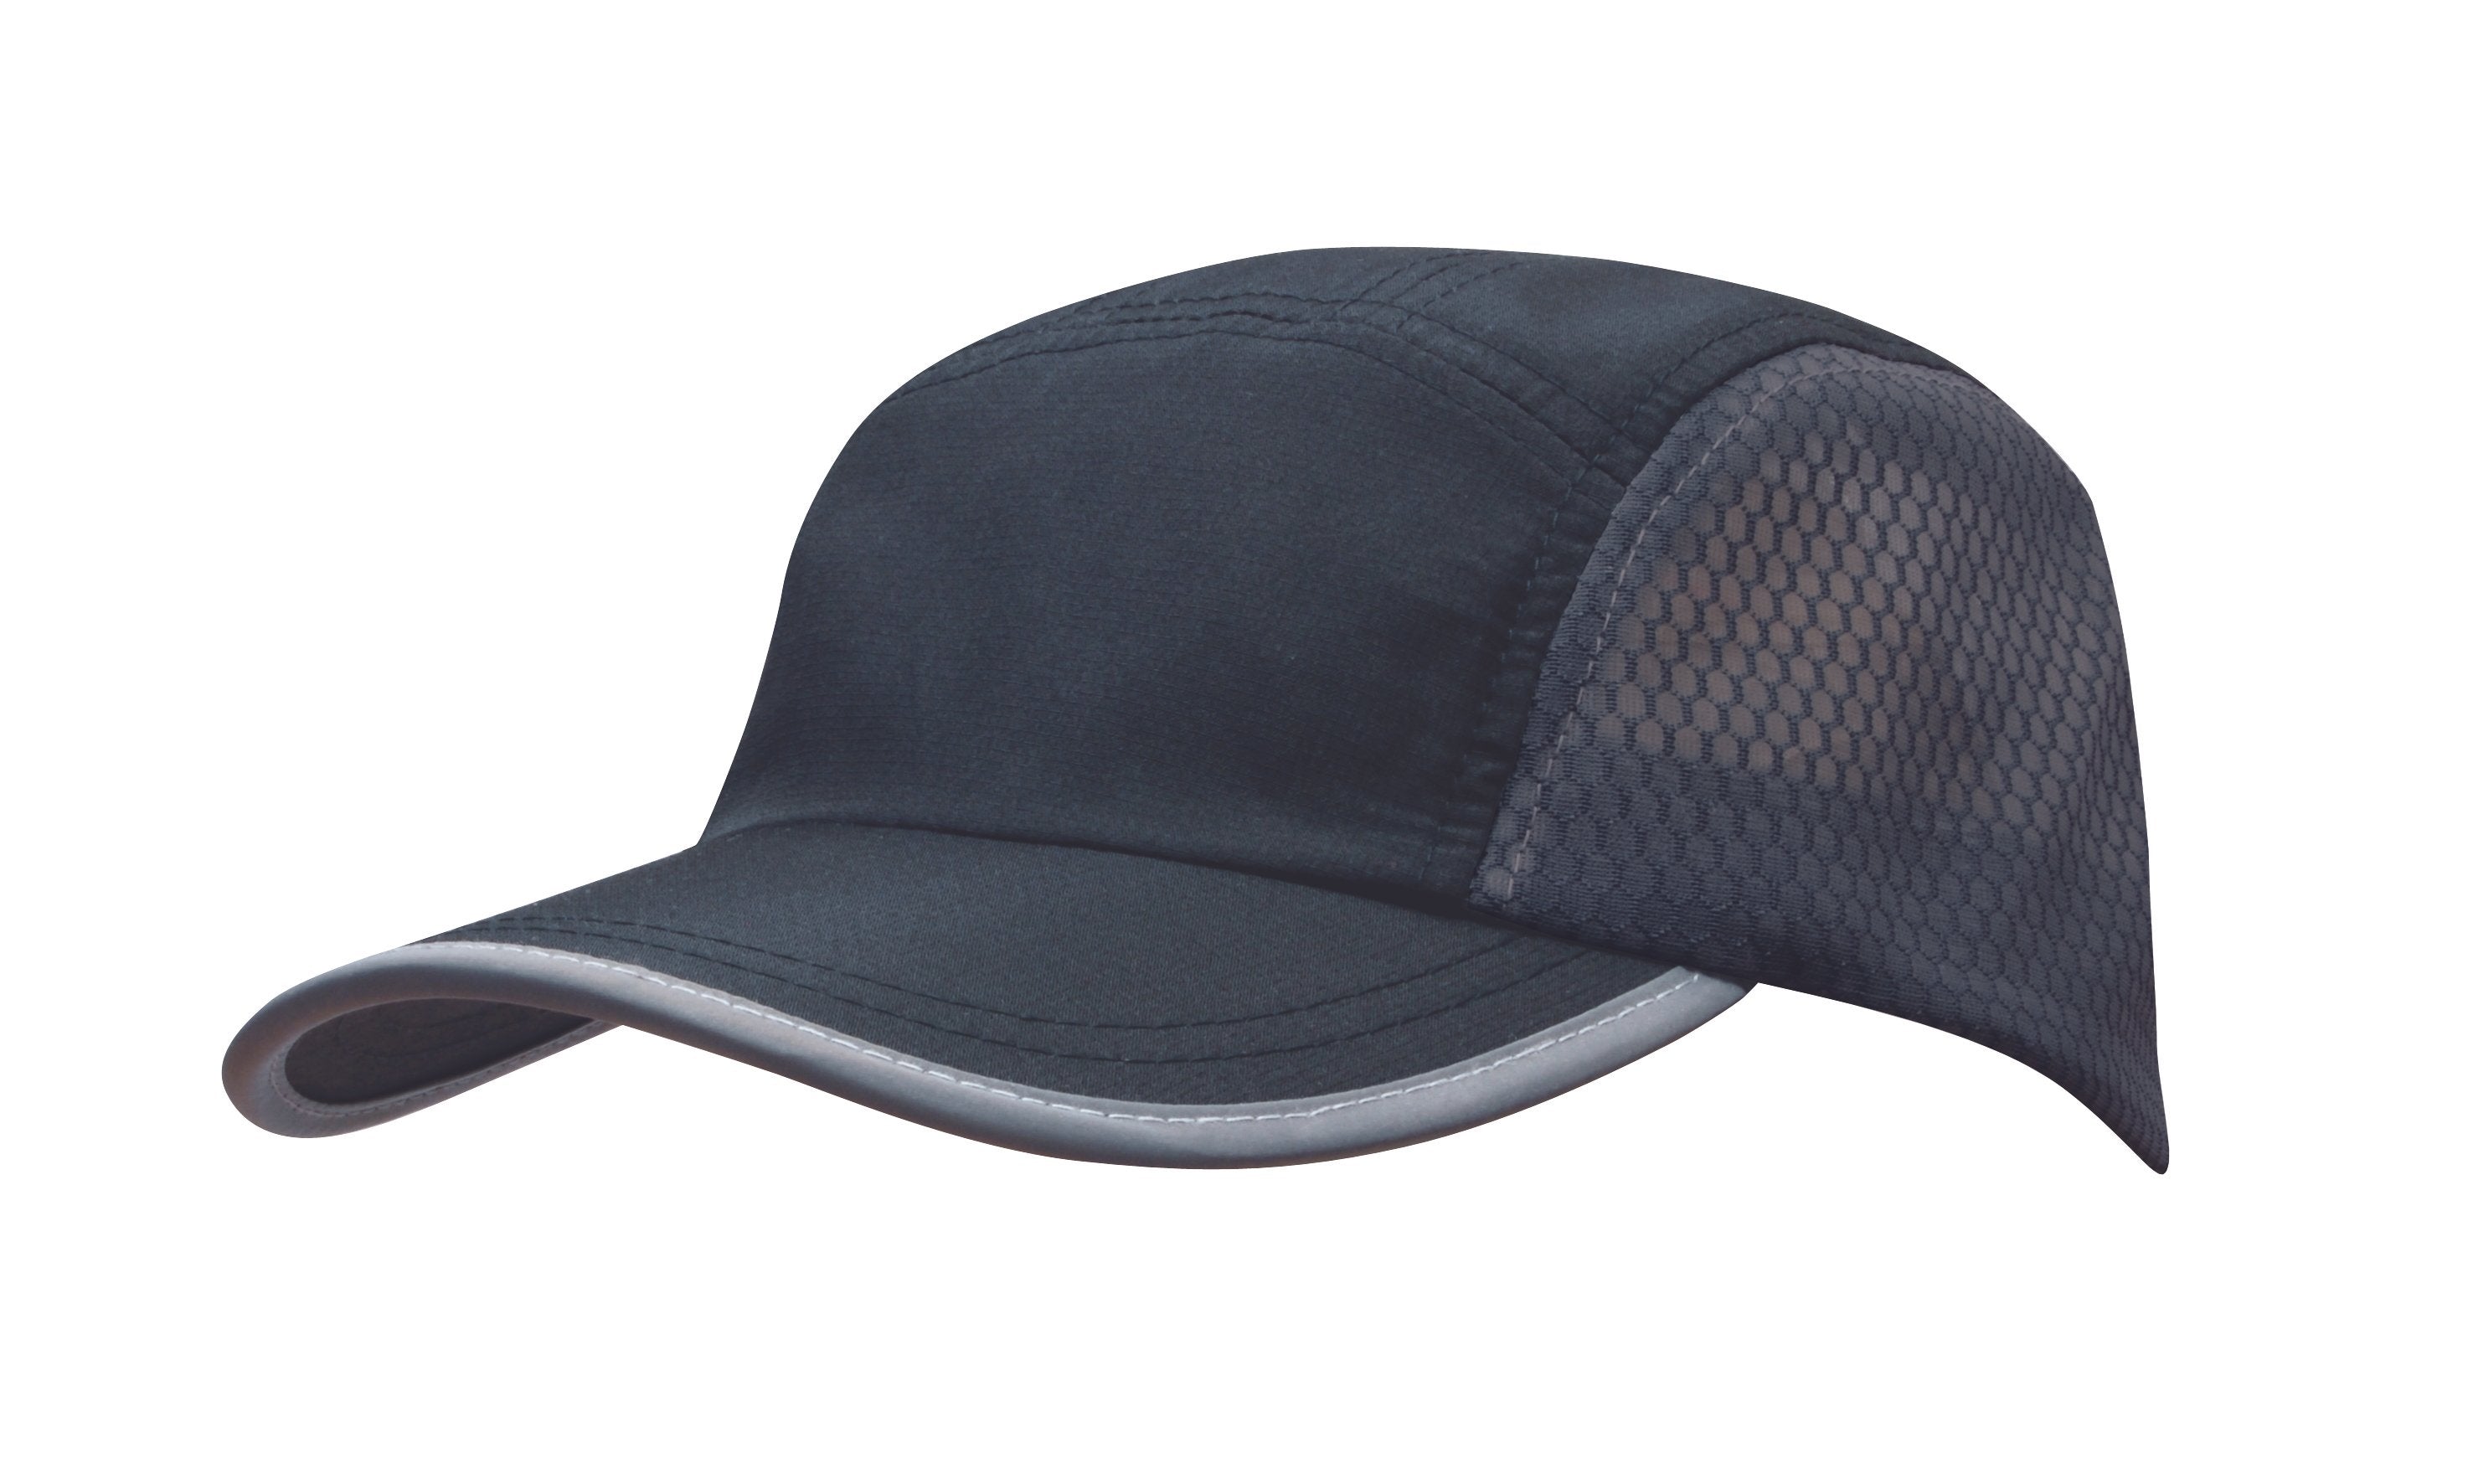 Headwear Sports Ripstop With Bee Hive Mesh And Towelling Sweatband (4003)